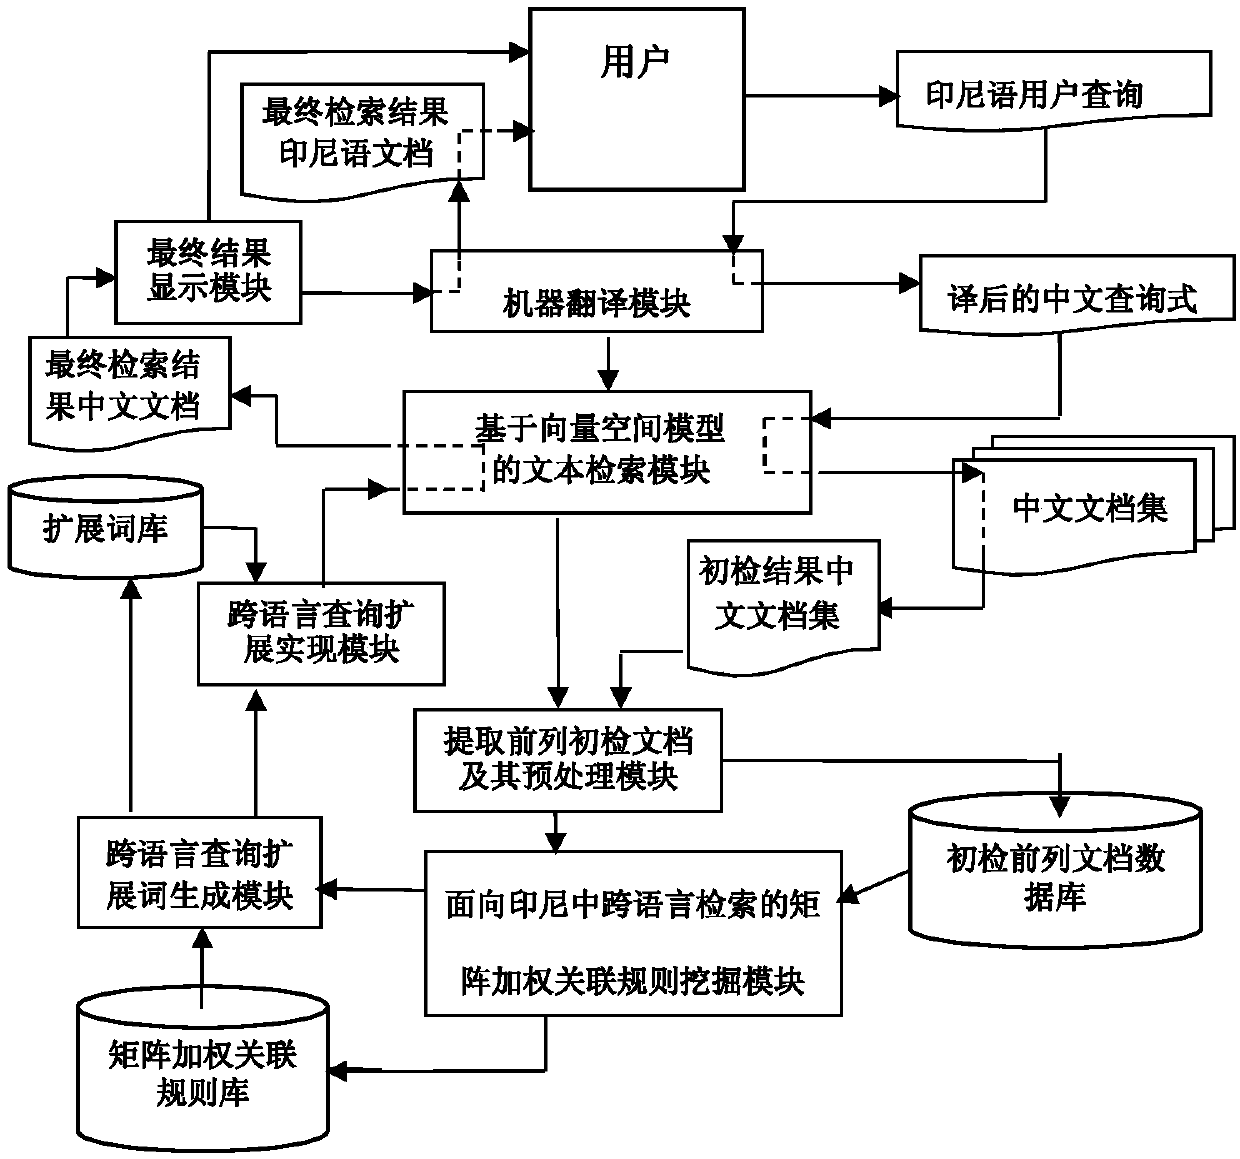 Indonesian-Chinese cross-language retrieval method and system based on matrix weighted association model